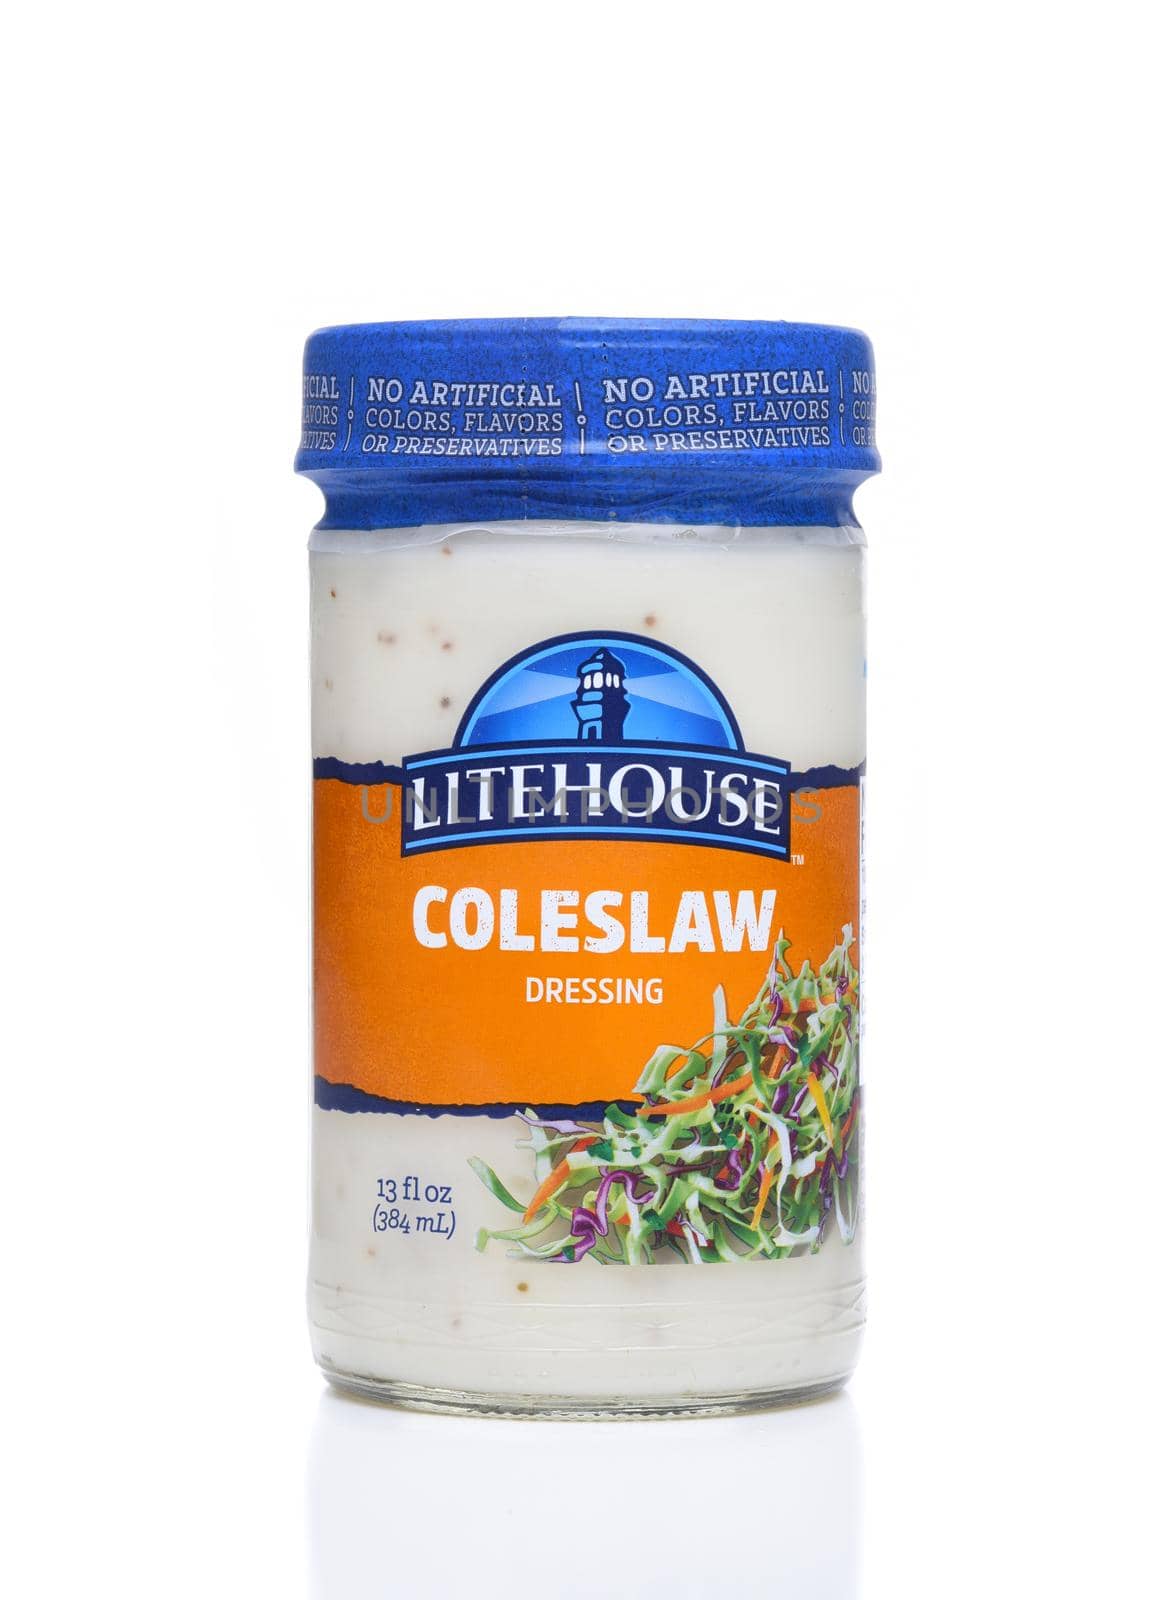 IRVINE, CALIFORNIA - DEC 4, 2018: A jar of Litehouse Coleslaw Dressing. The popular dressing is sweet, tangy and thick.